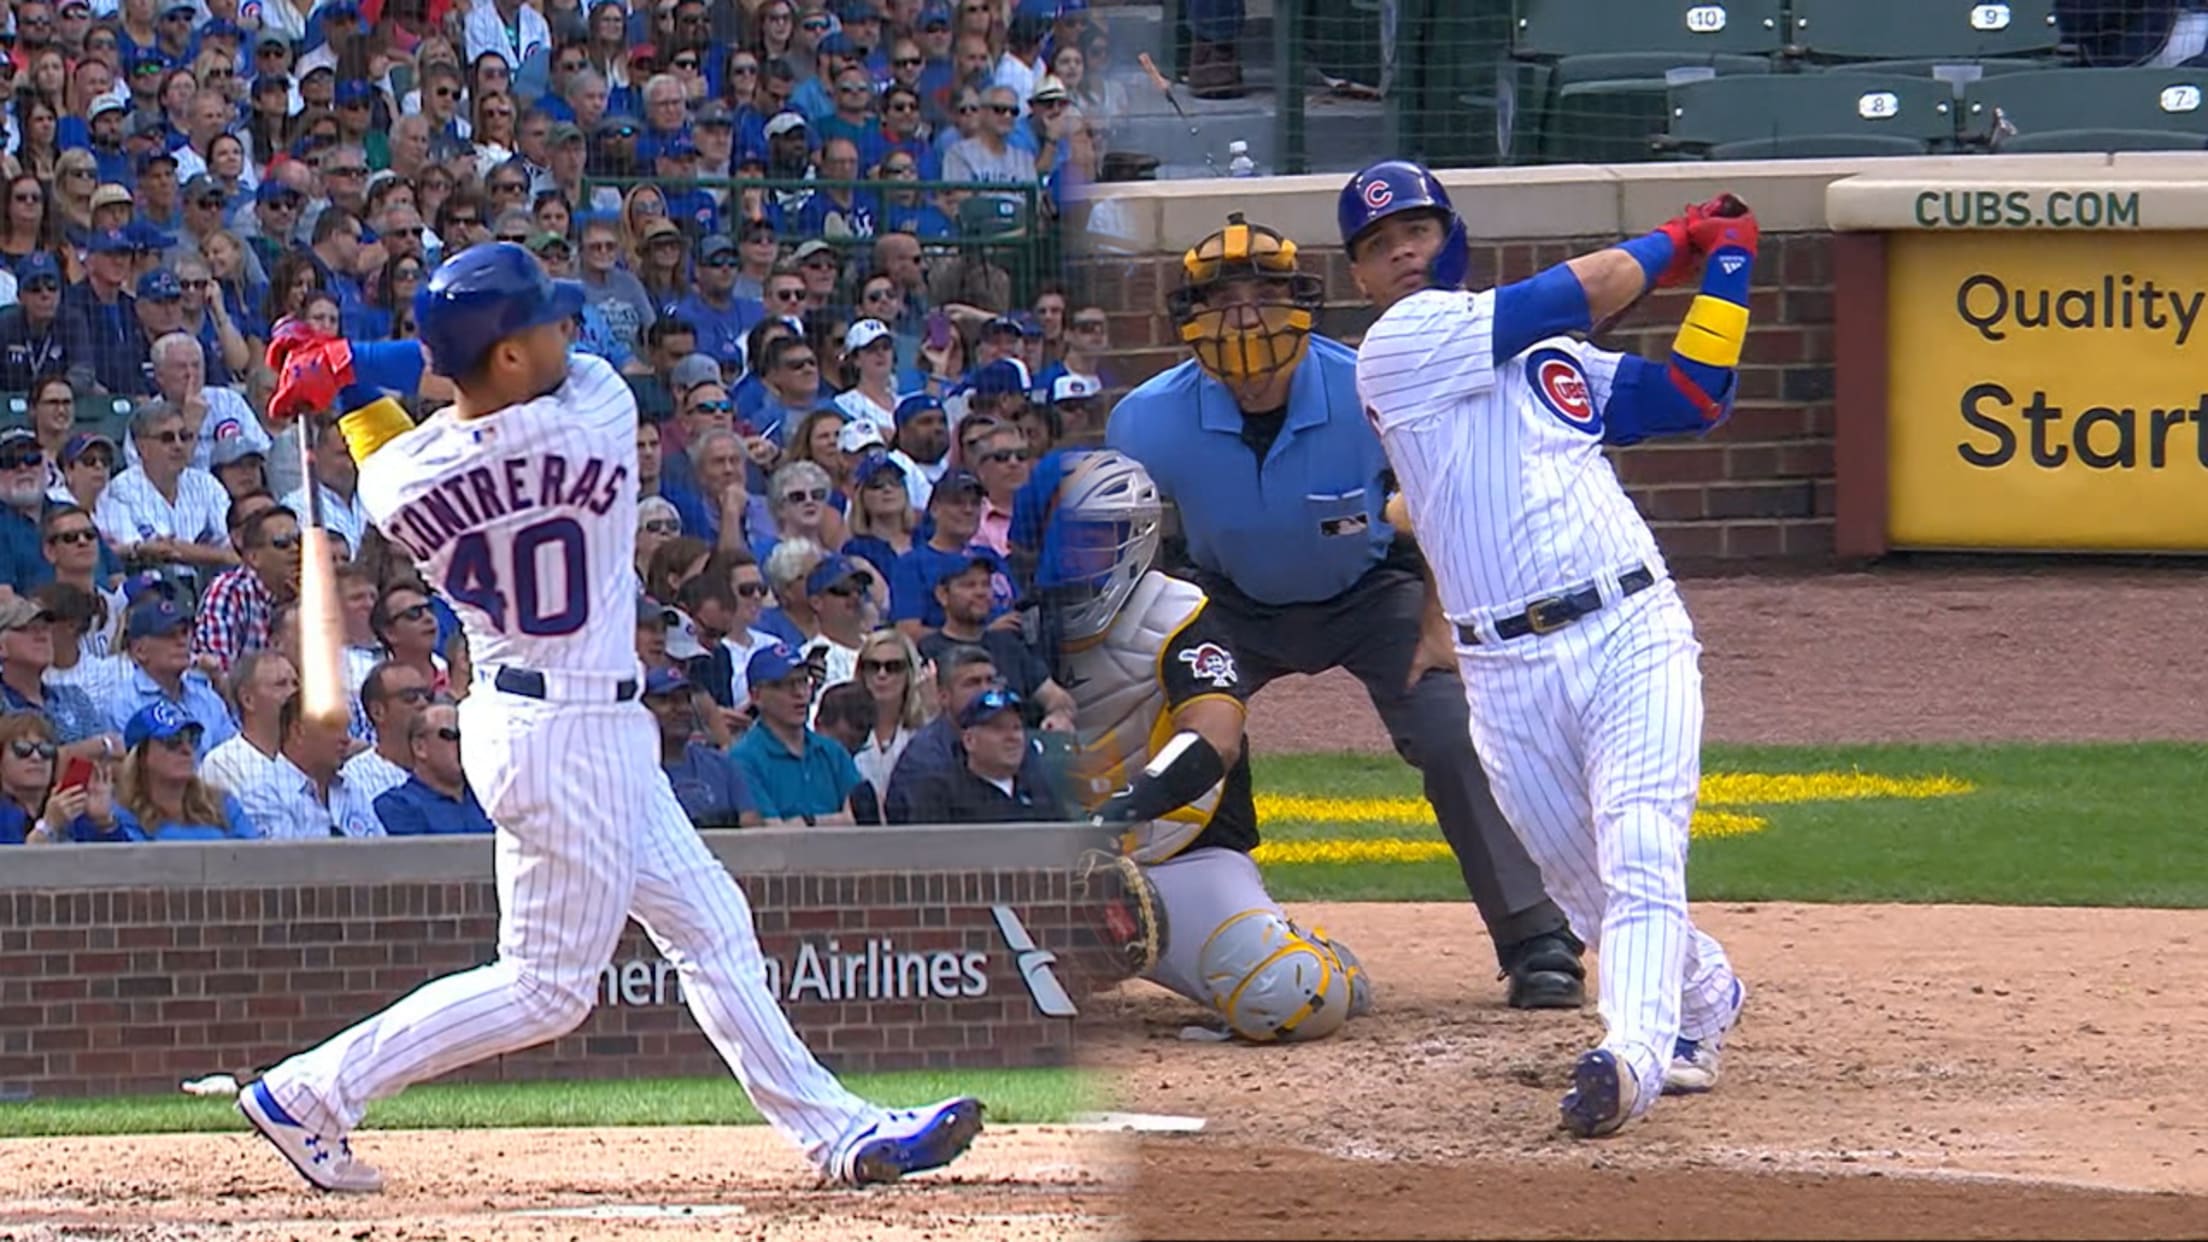 Contreras' 2 HRs in 3 Innings' 2 HRs in 3 innings